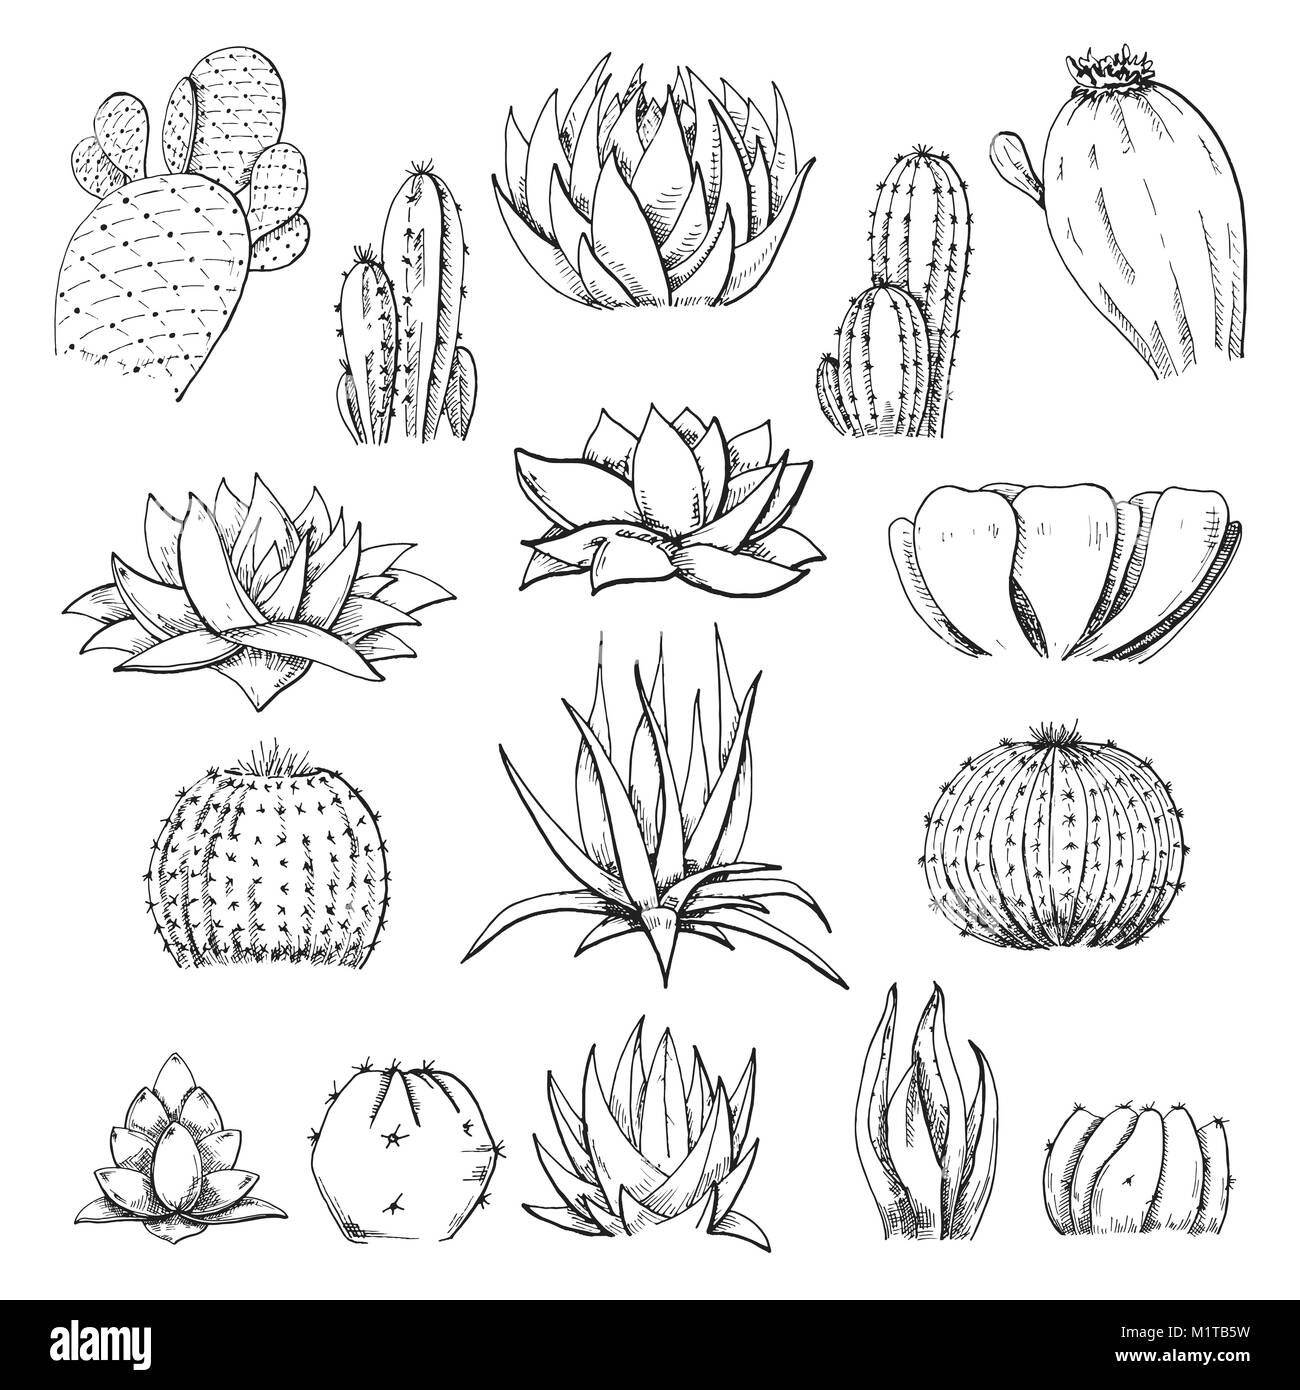 Sketch succulents. Vector illustration of a sketch style. Stock Vector